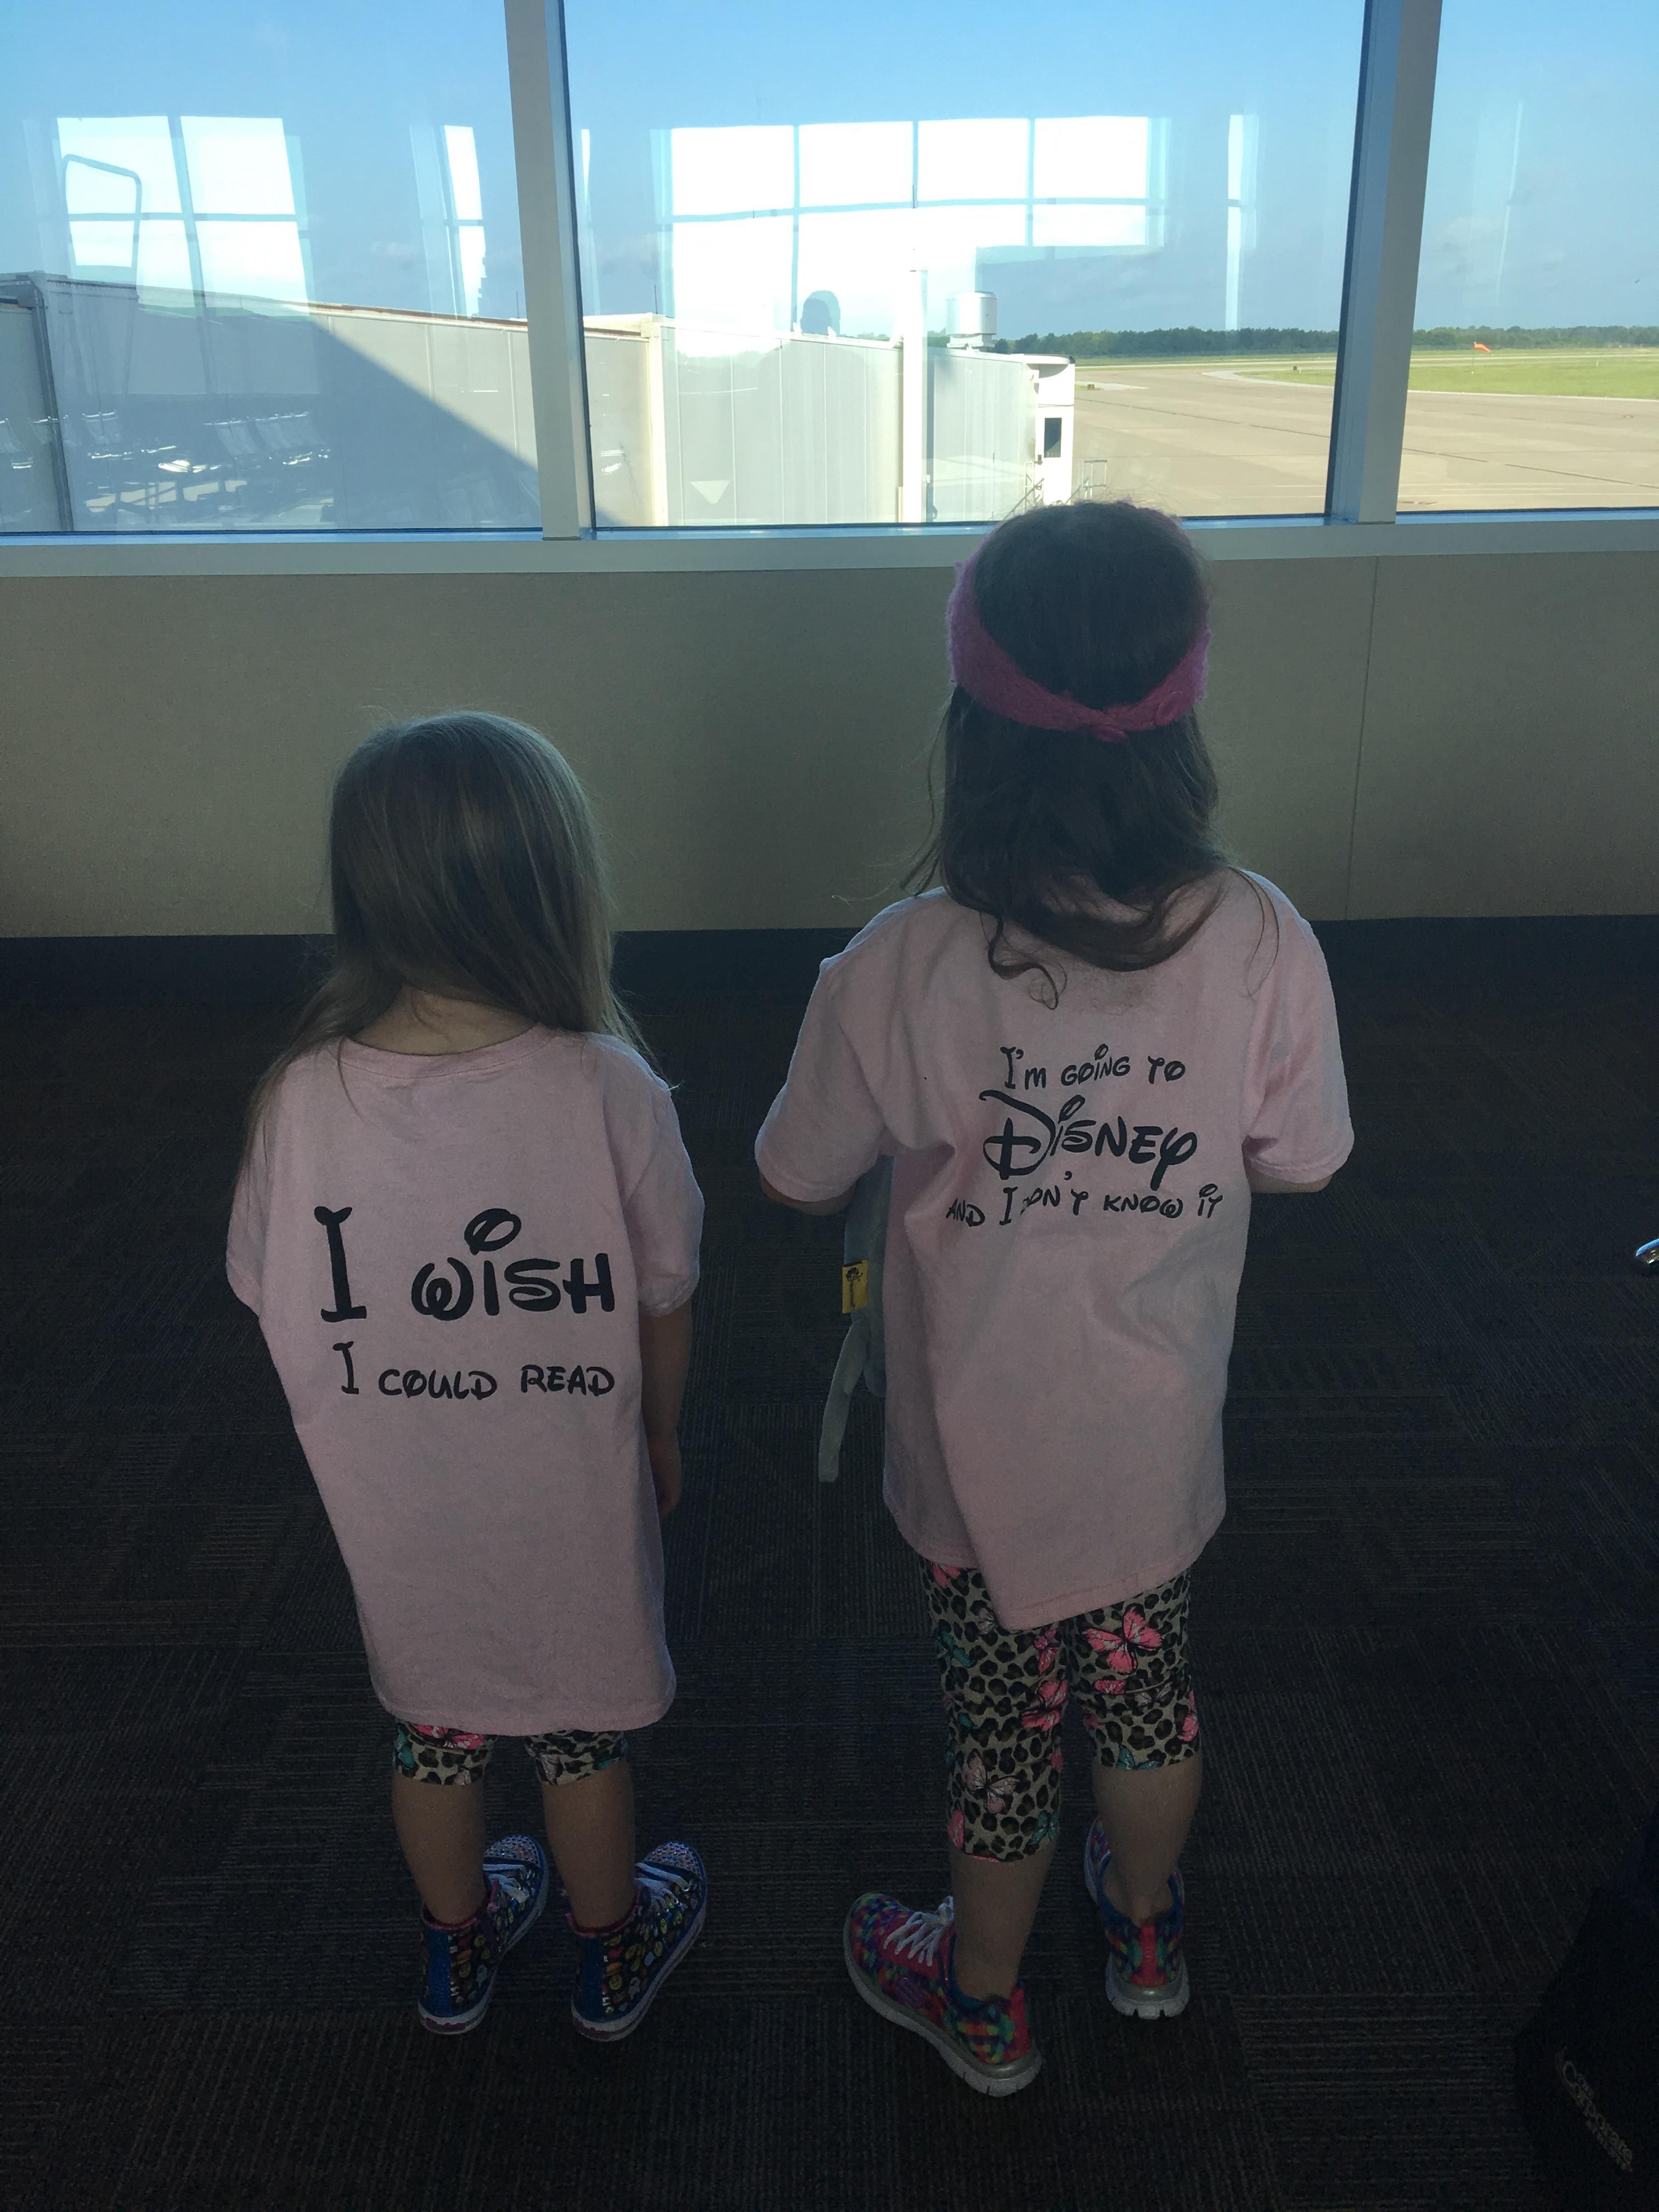 On their way to Disney...and they don't know it. Lol